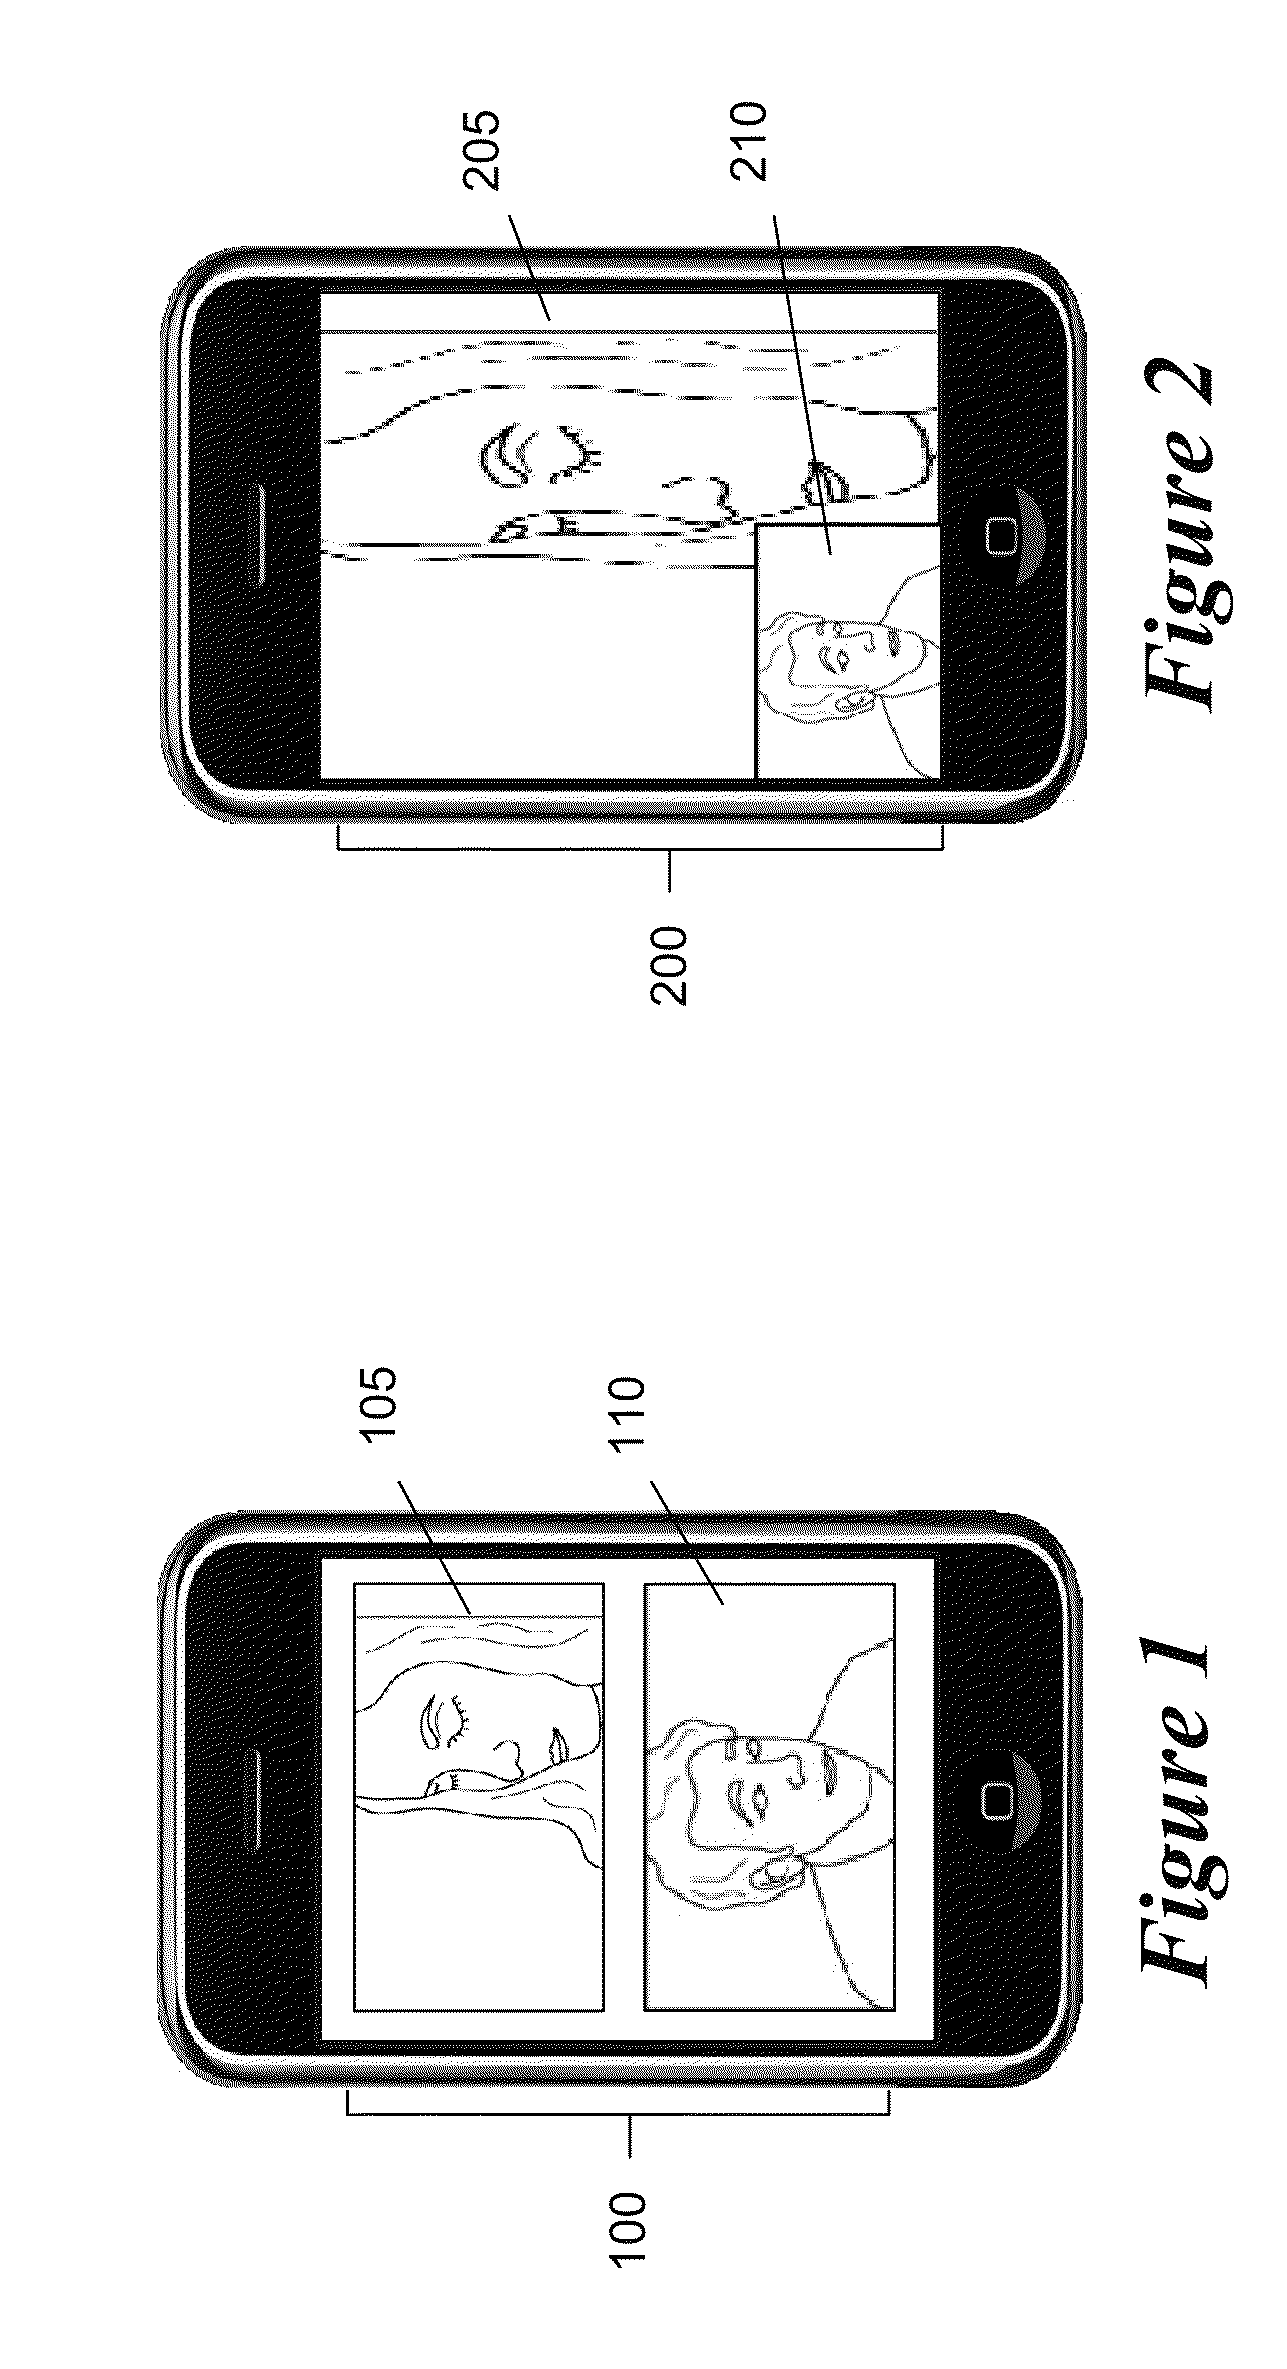 Switching Cameras During a Video Conference of a Multi-Camera Mobile Device